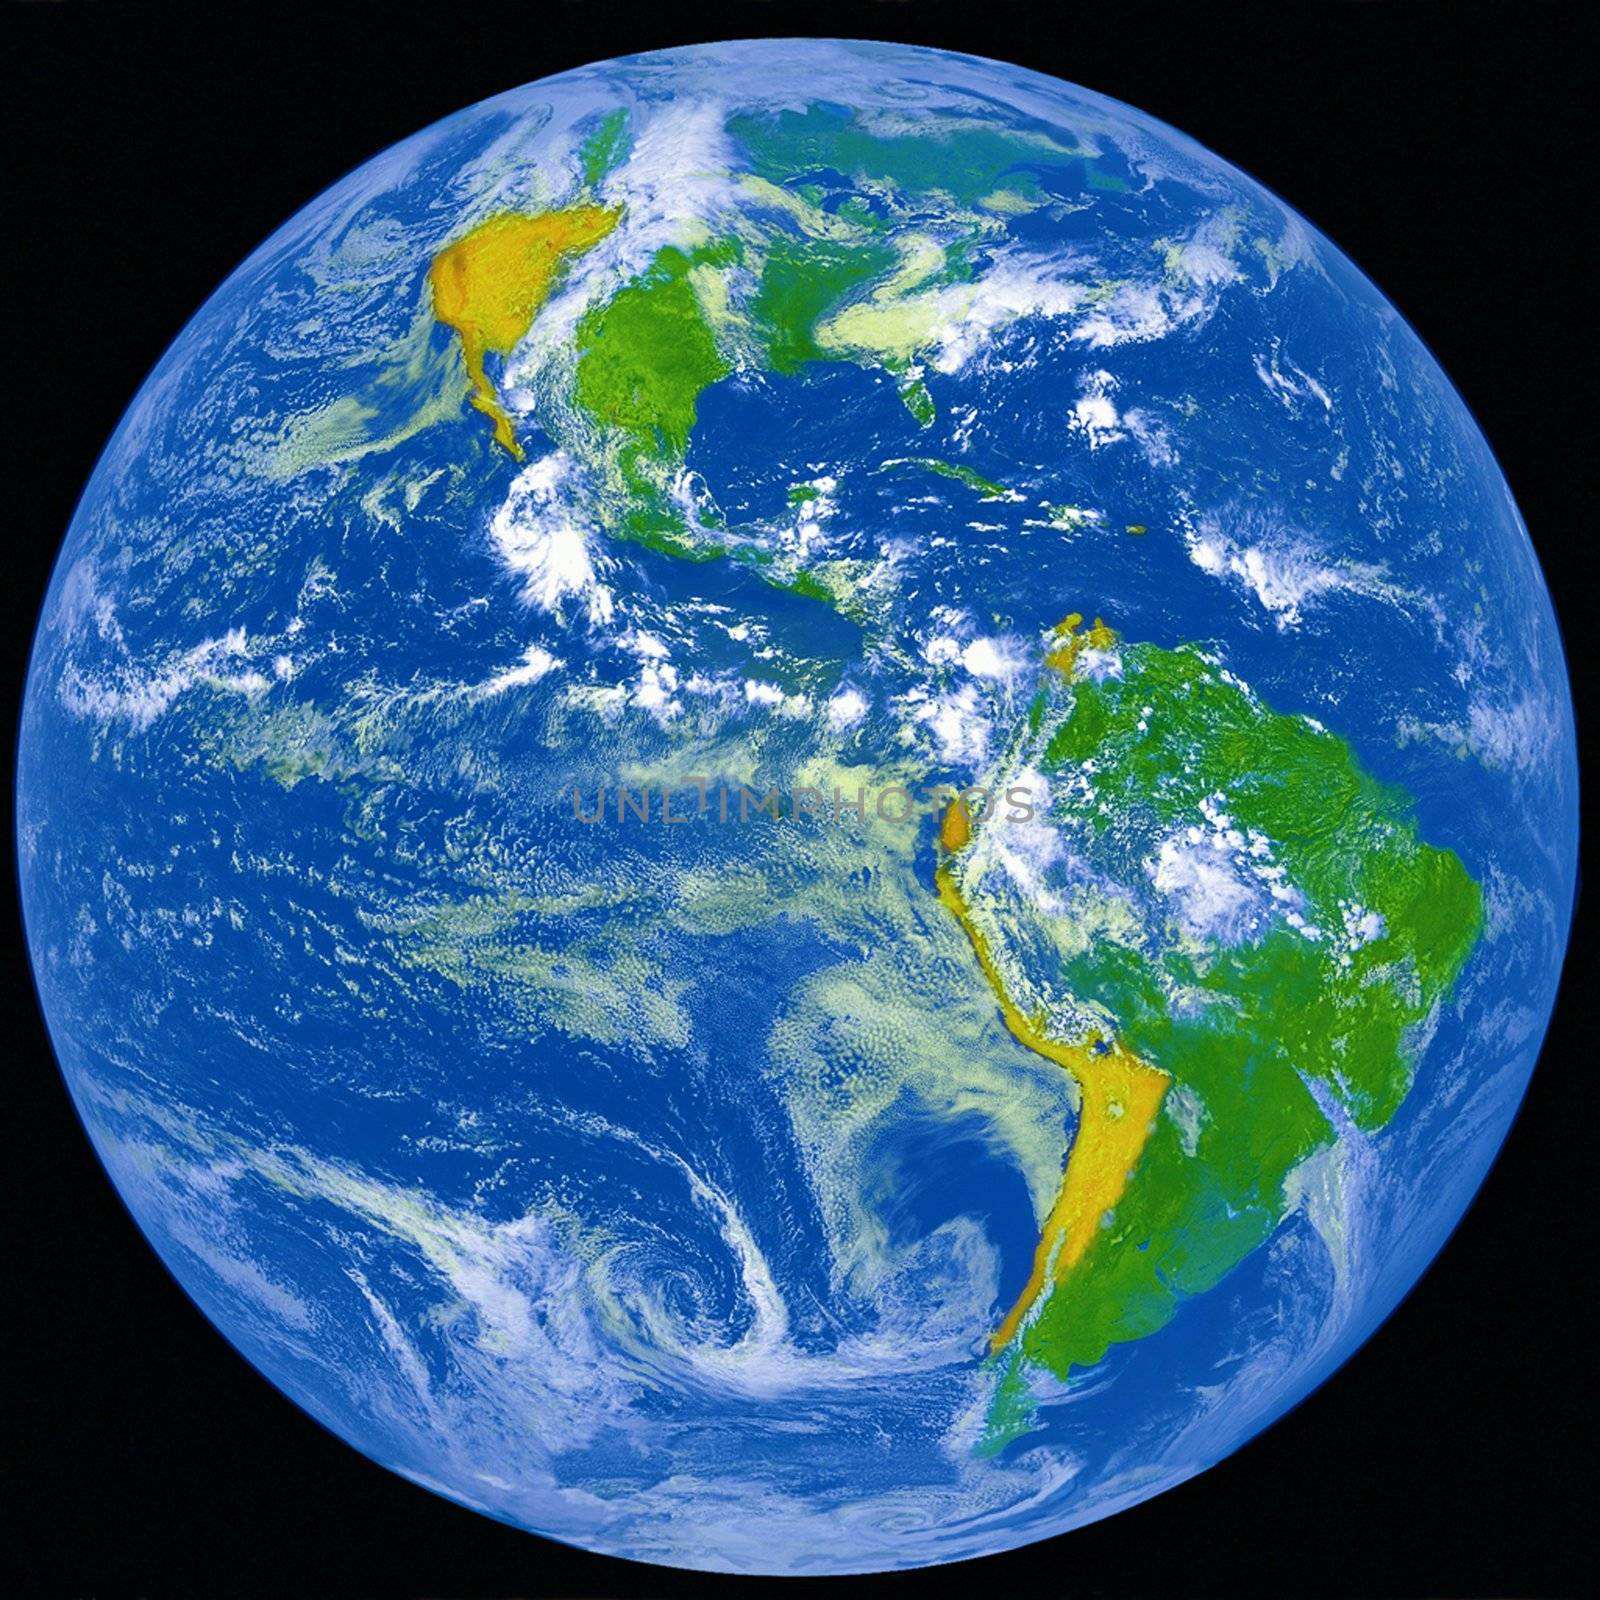 NASA image of Earth from outer space.